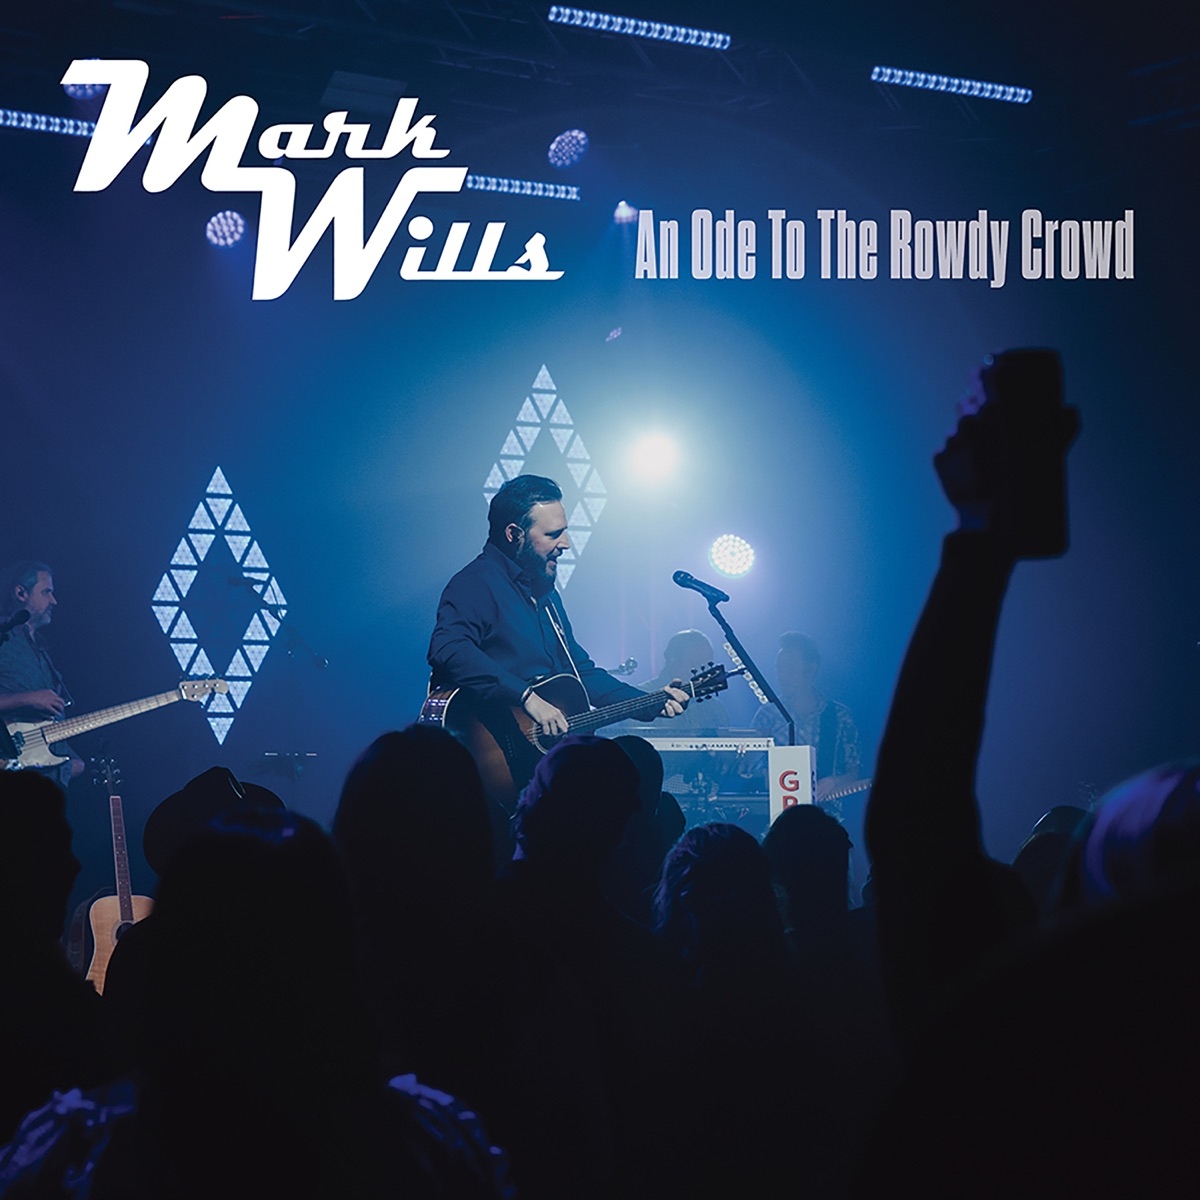 This one is truly an ode to the rowdy crowd! Thank you guys for streaming and sharing this collection of catalog favorites for over one year! #MarkWills #CountryMusic